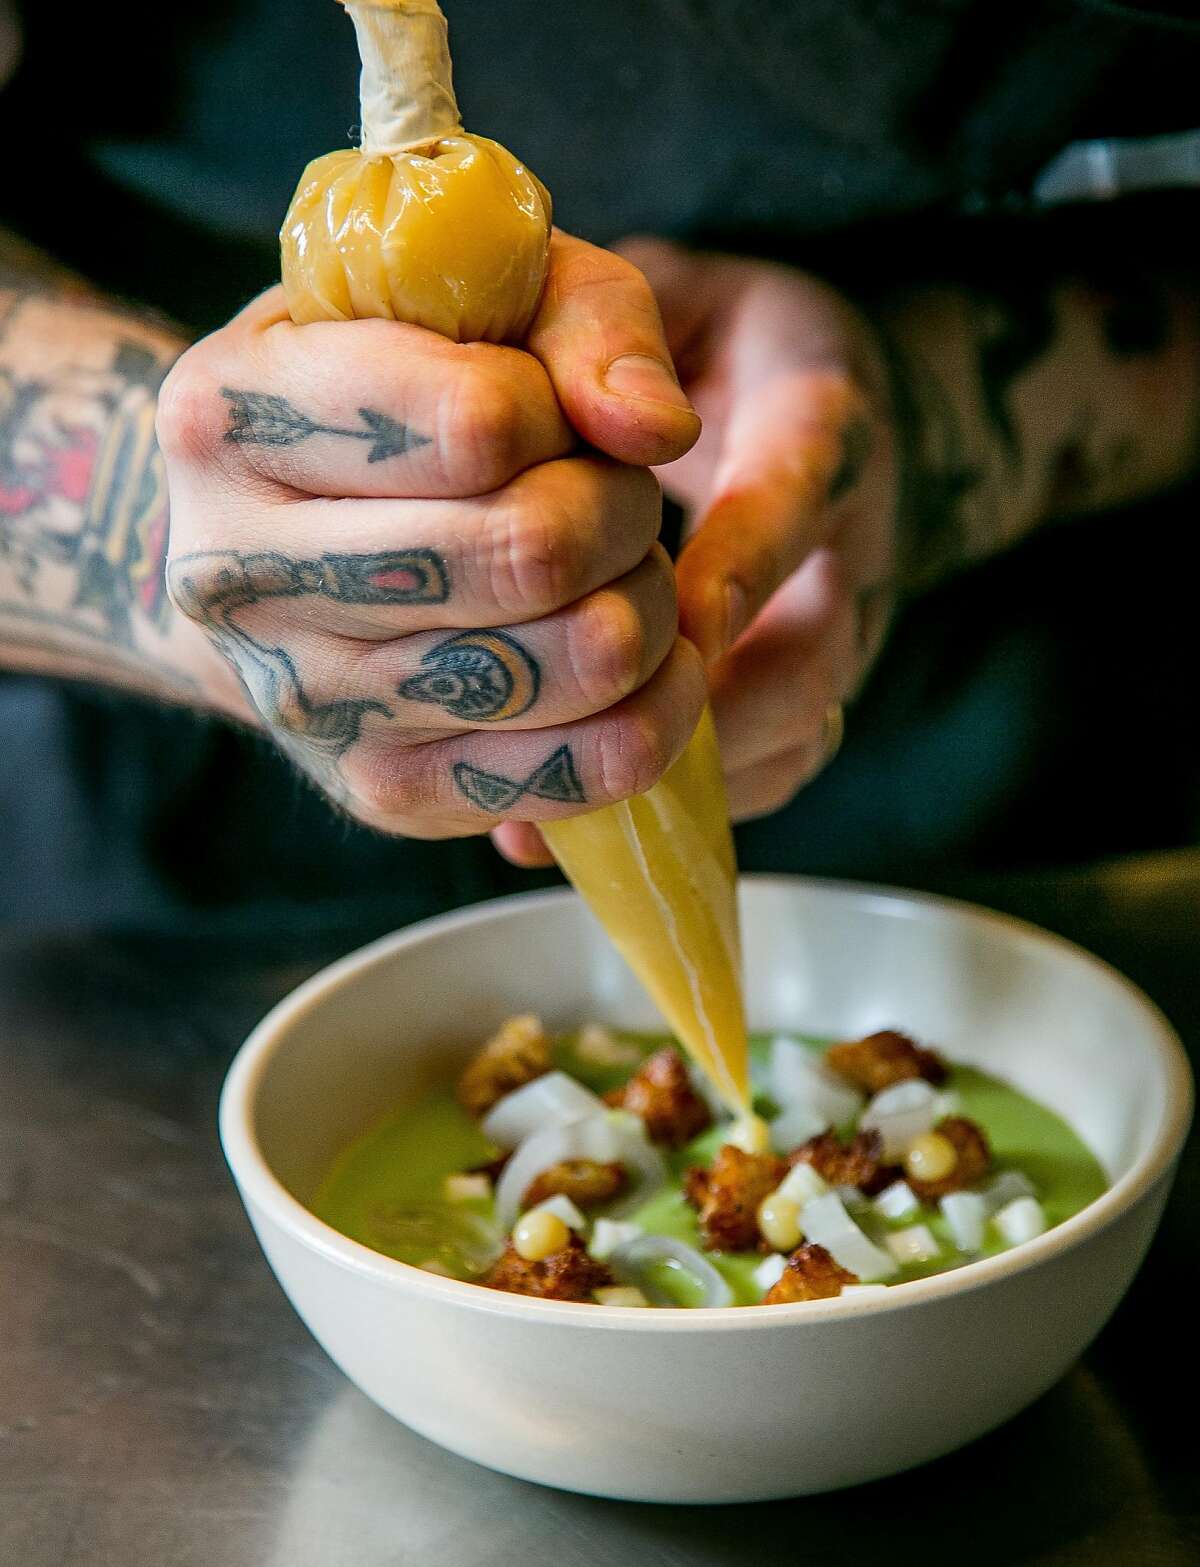 Chef Brett Cooper plates the Green Garlic soup at Aster in San Francisco, Calif., on June 6th, 2015.